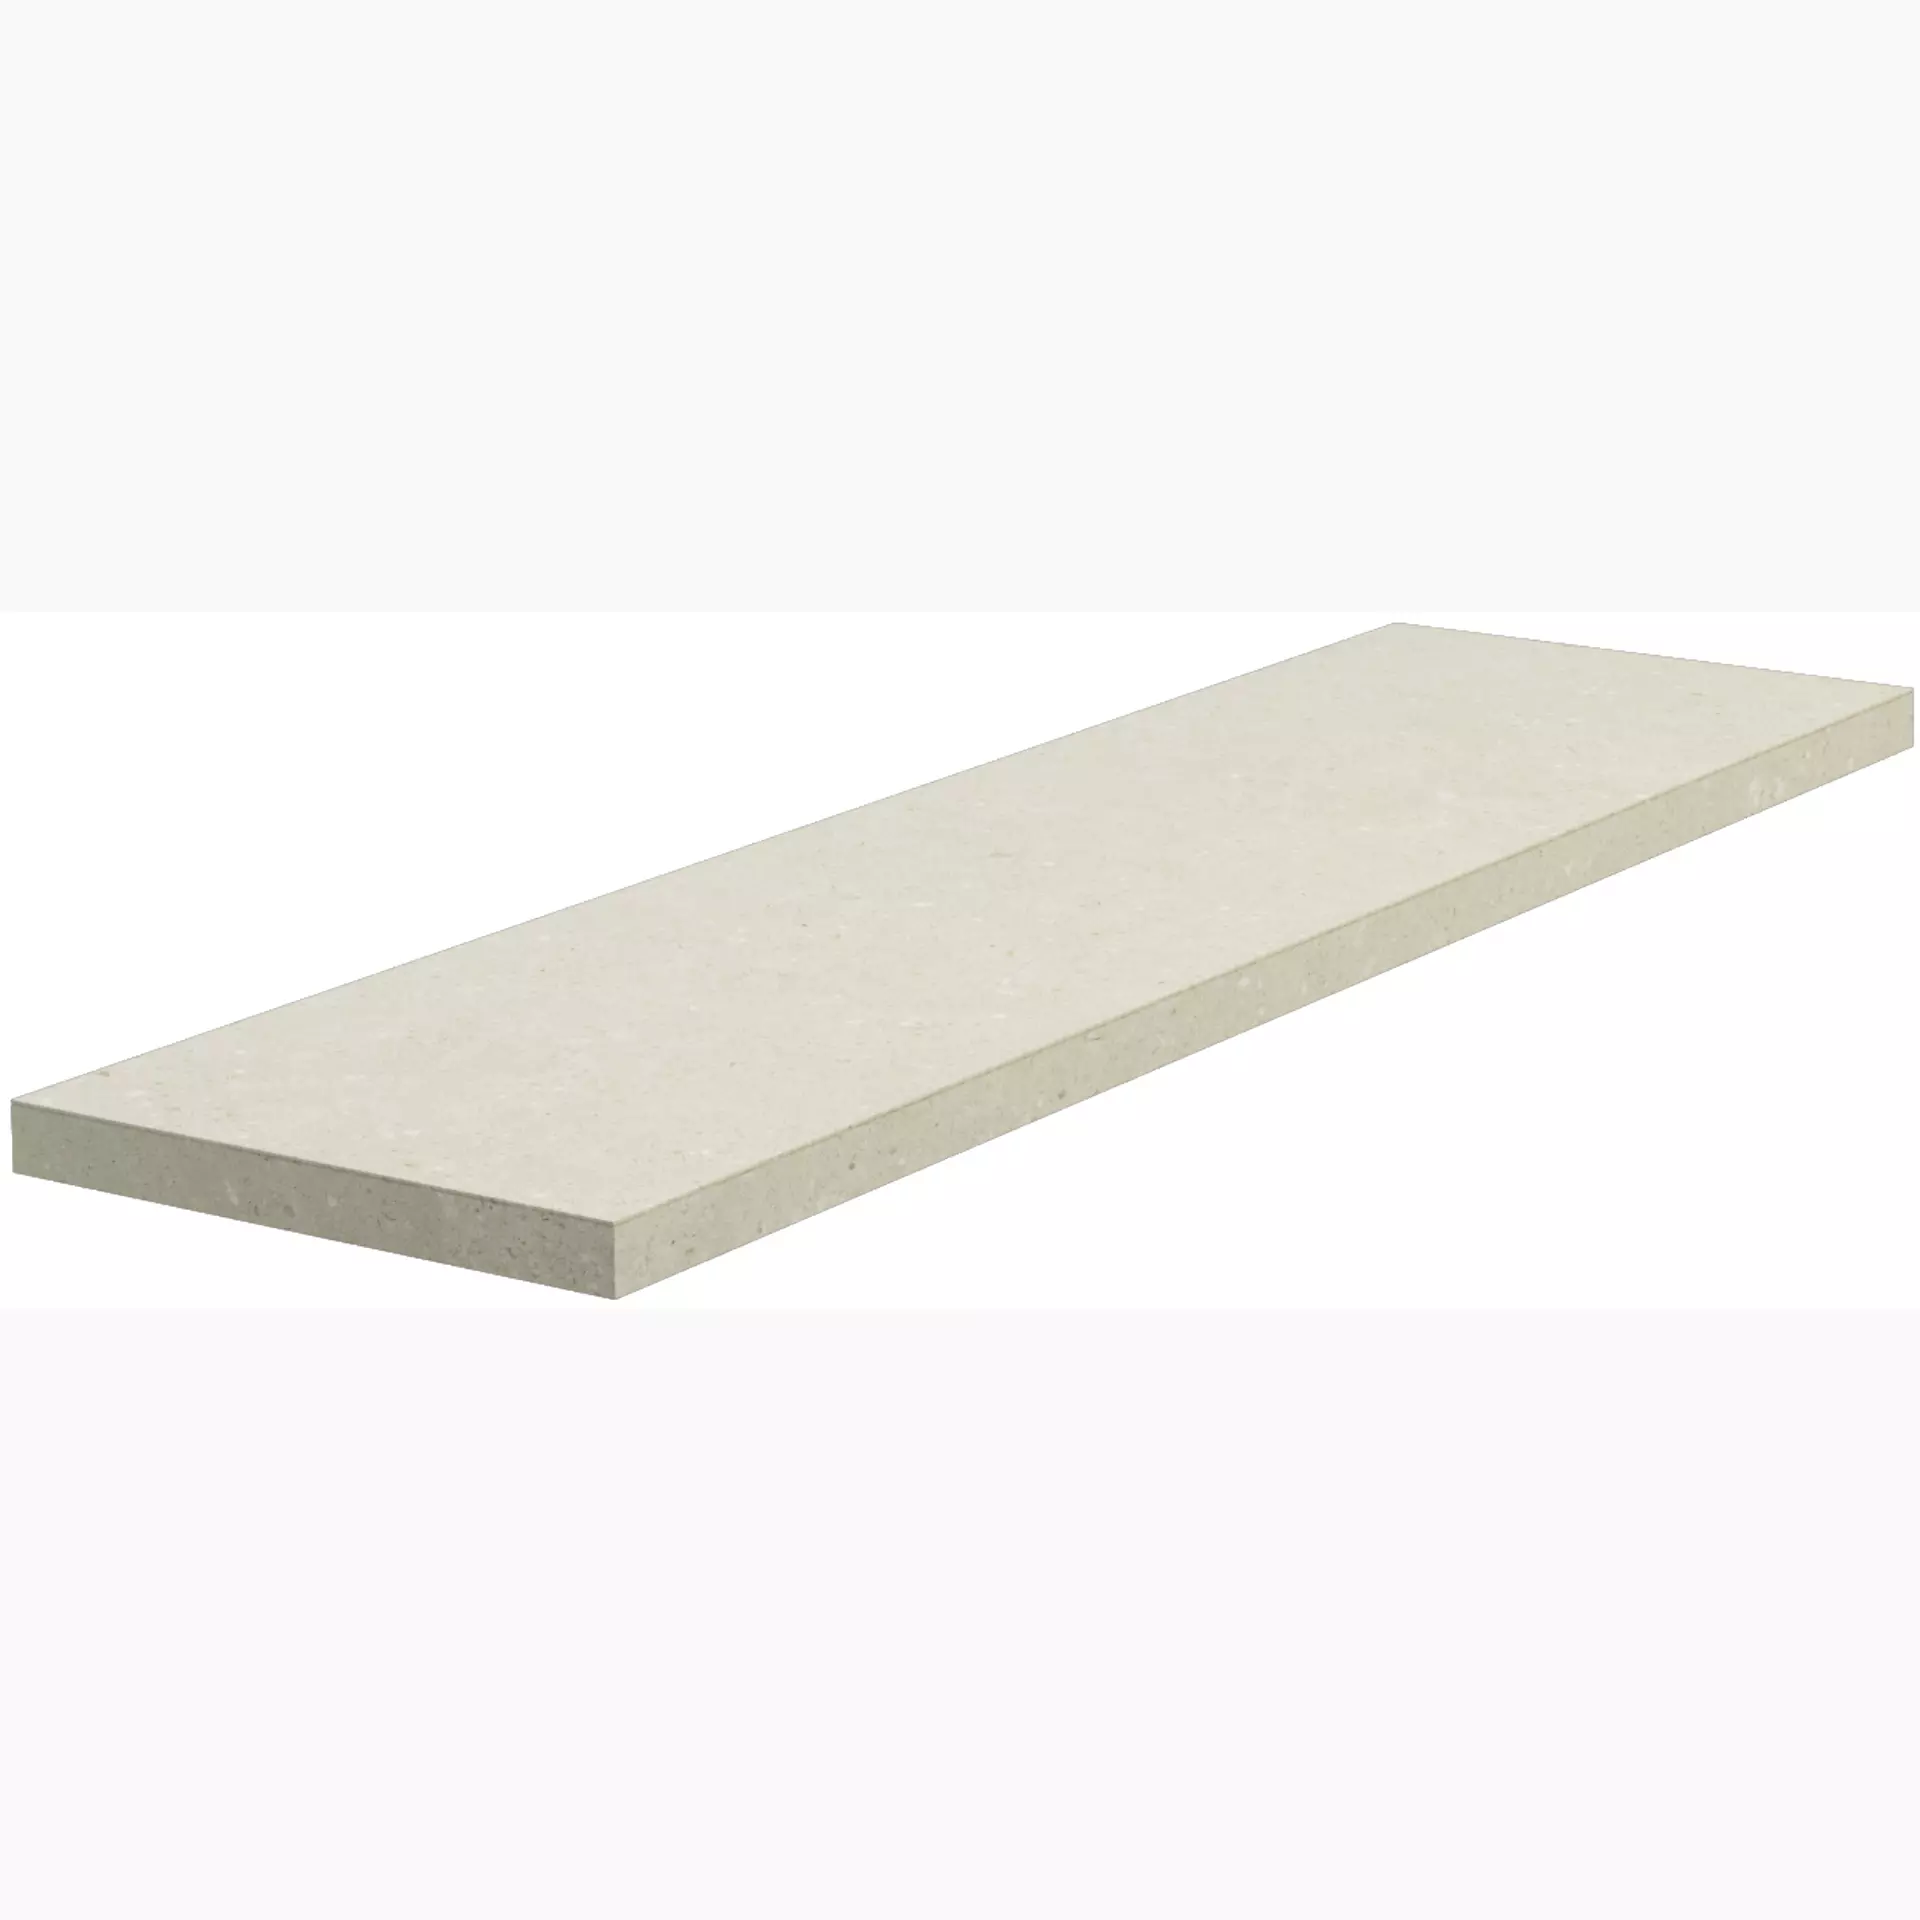 Del Conca Hwd Wild White Hwd10 Naturale Corner plate Step Left G3WD10RGS12 33x120cm rectified 8,5mm